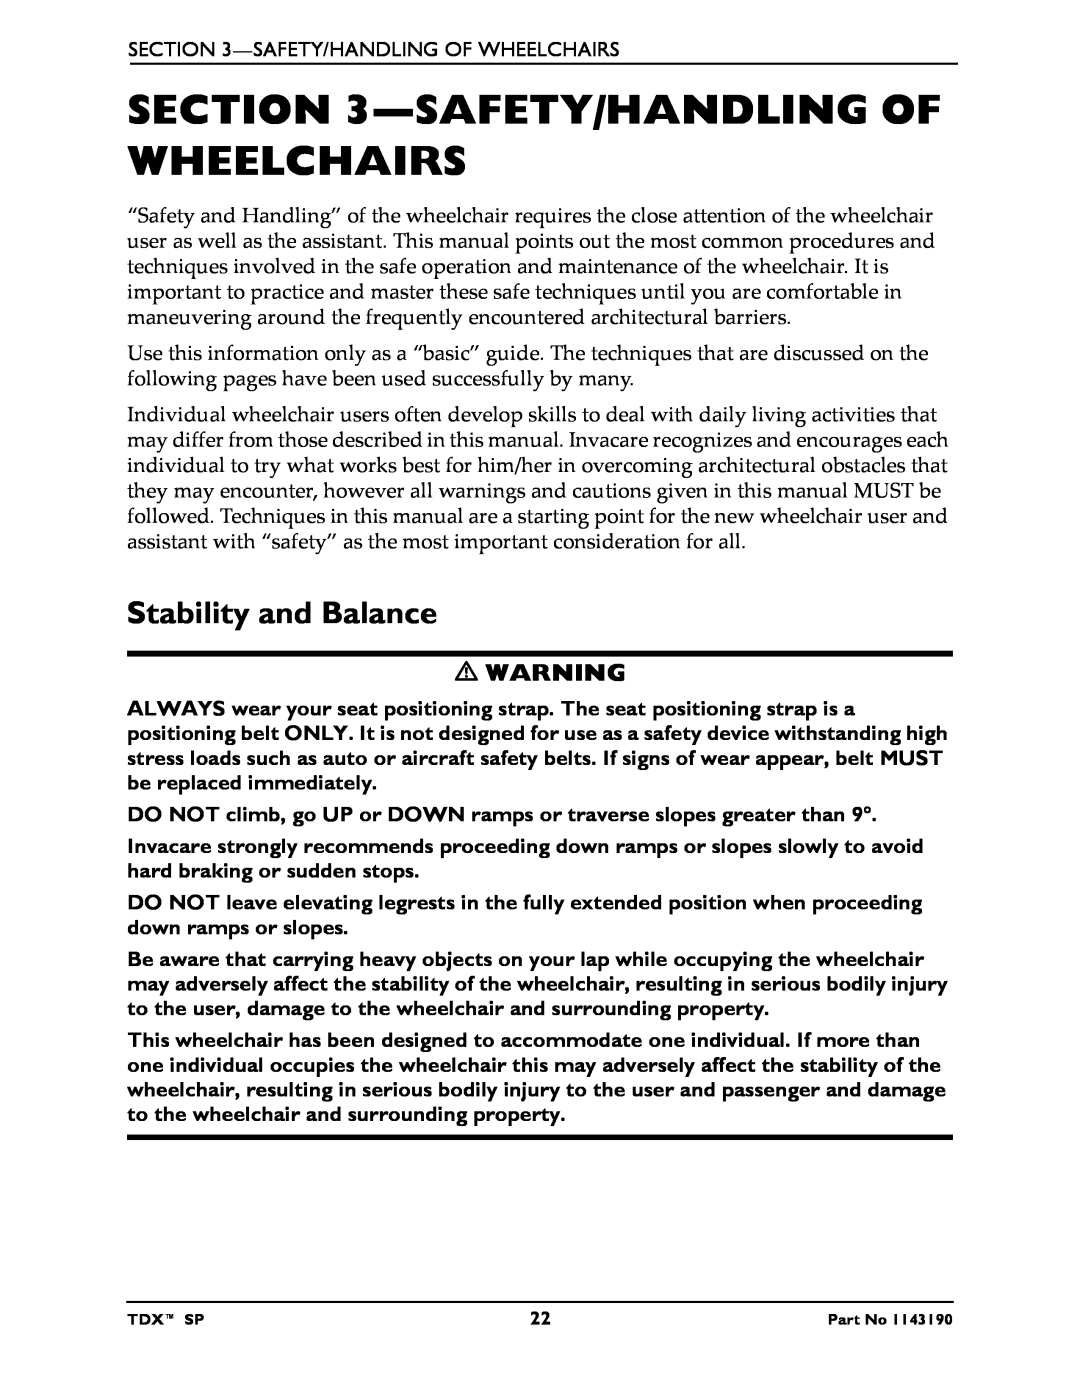 Invacare SP manual Safety/Handling Of Wheelchairs, Stability and Balance 